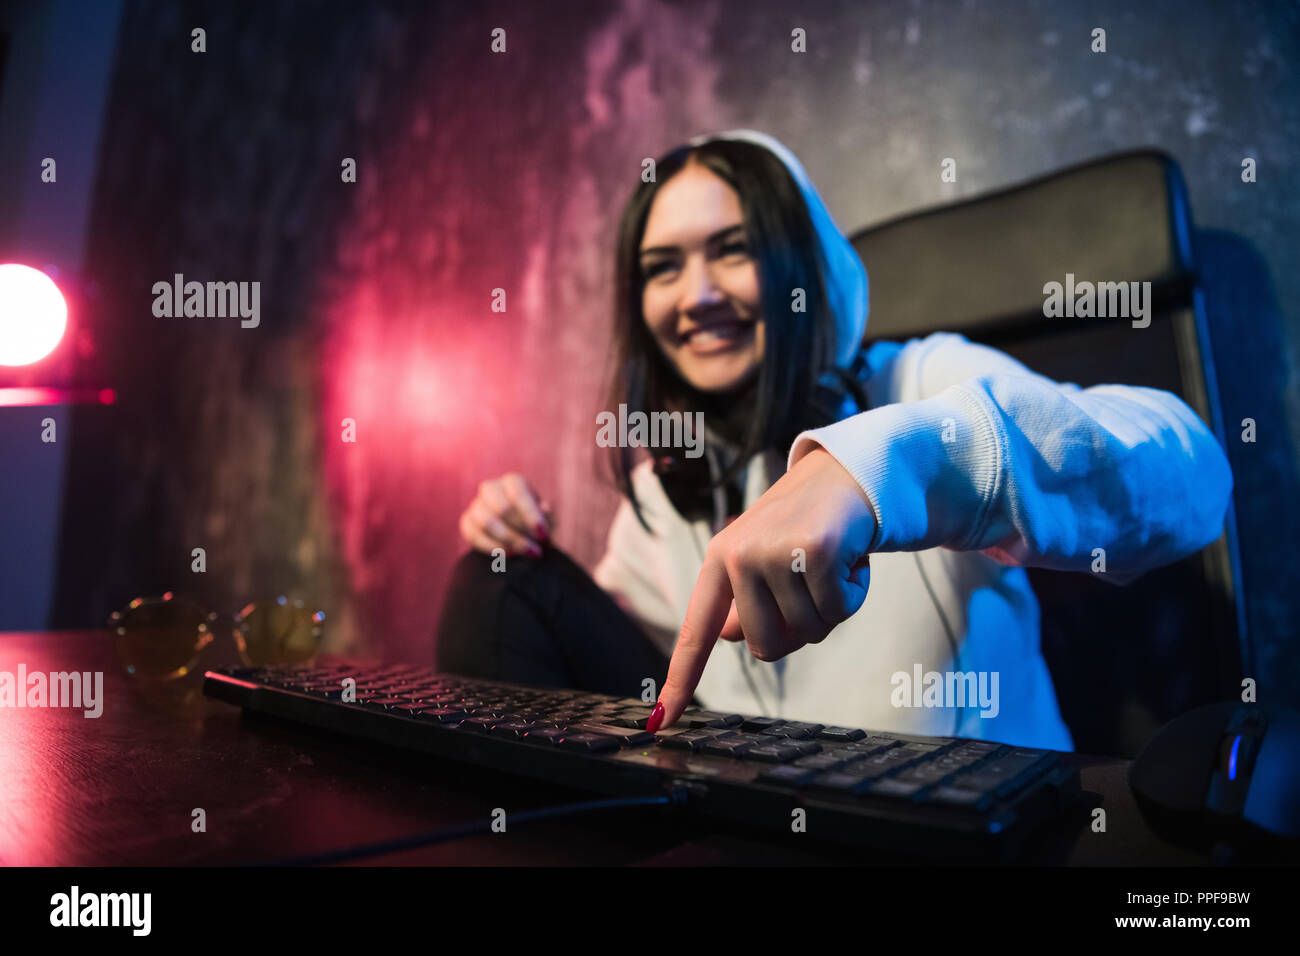 Woman in the hood sitting and working at laptop as hacker. Running malware program on computer in the internet with malevolent smile on her face. Stock Photo